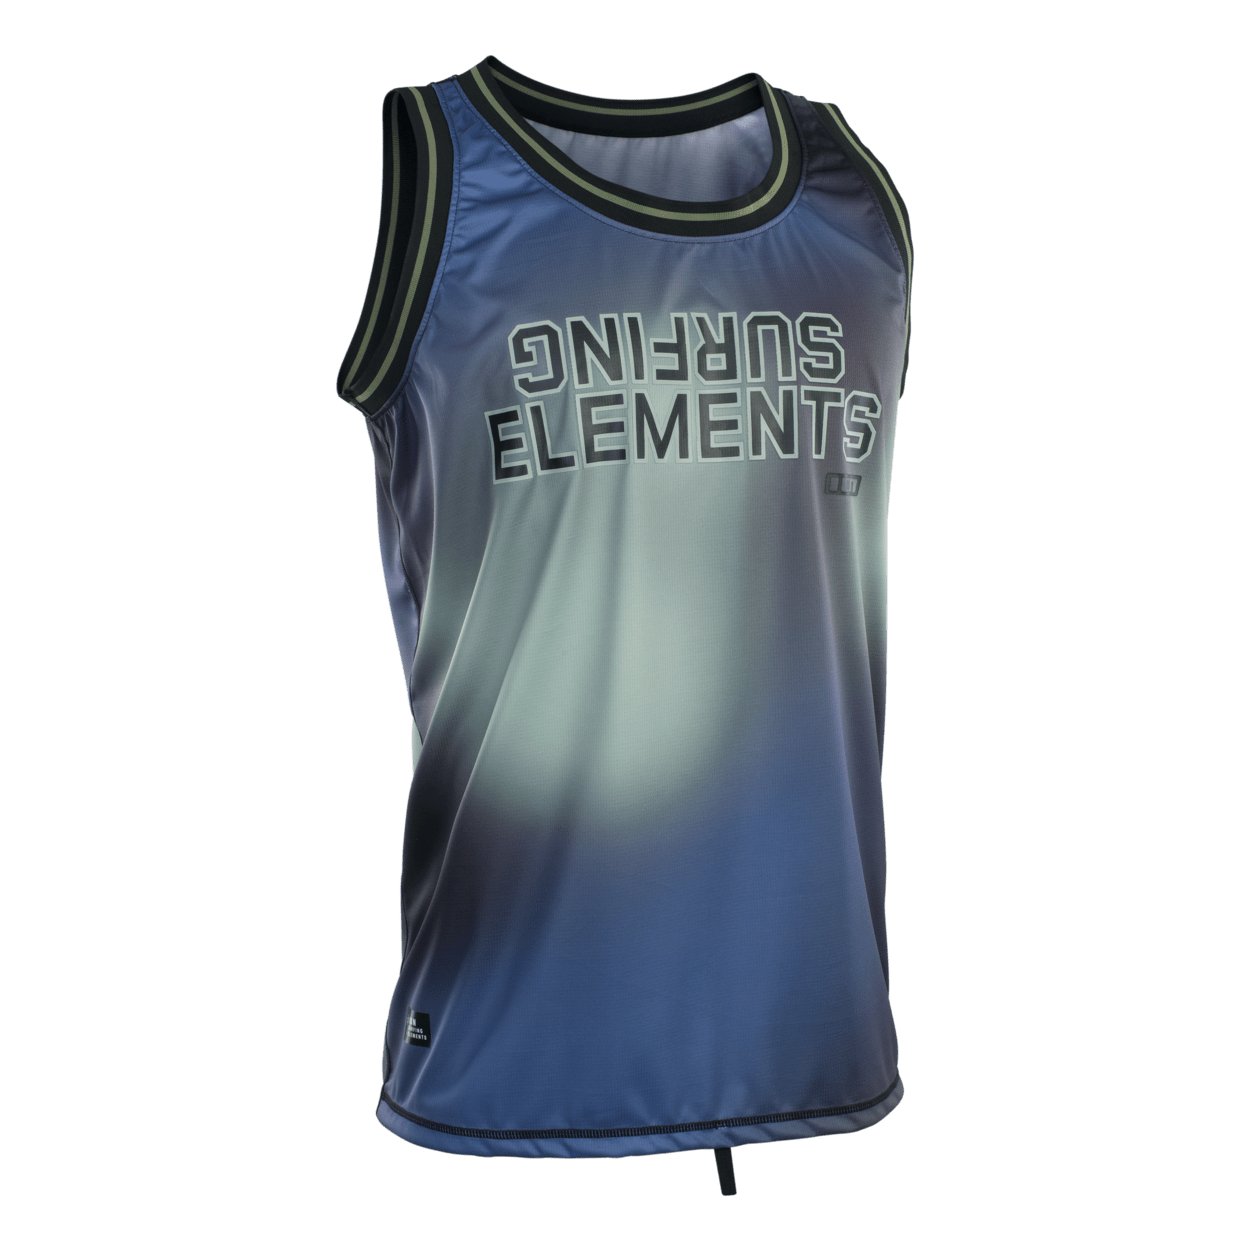 ION Basketball Shirt 2023 - Worthing Watersports - 9010583117935 - Tops - ION Water